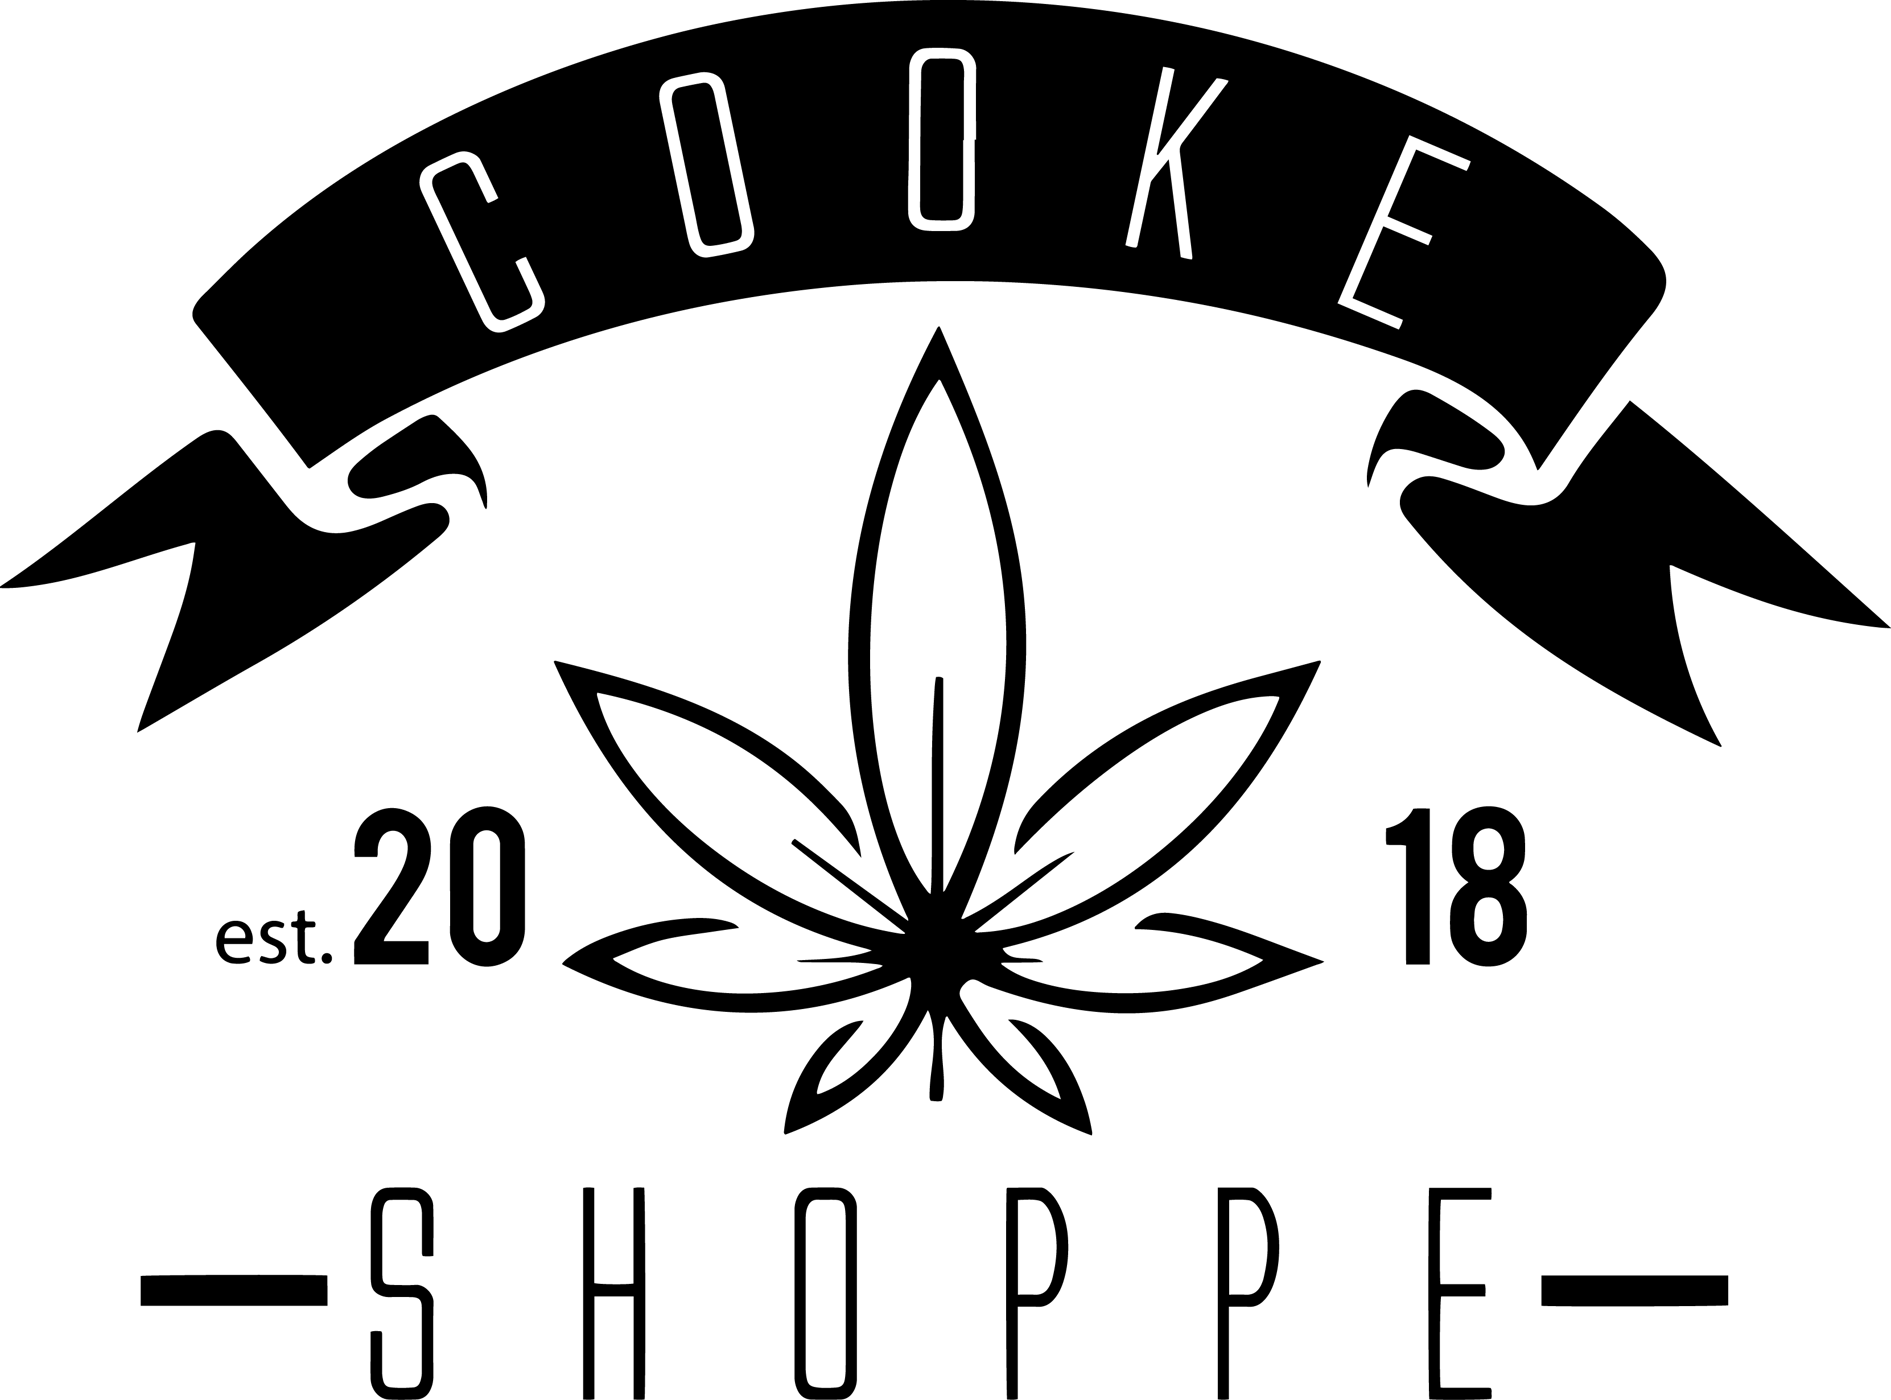 Welcome to The Cooke Shoppe